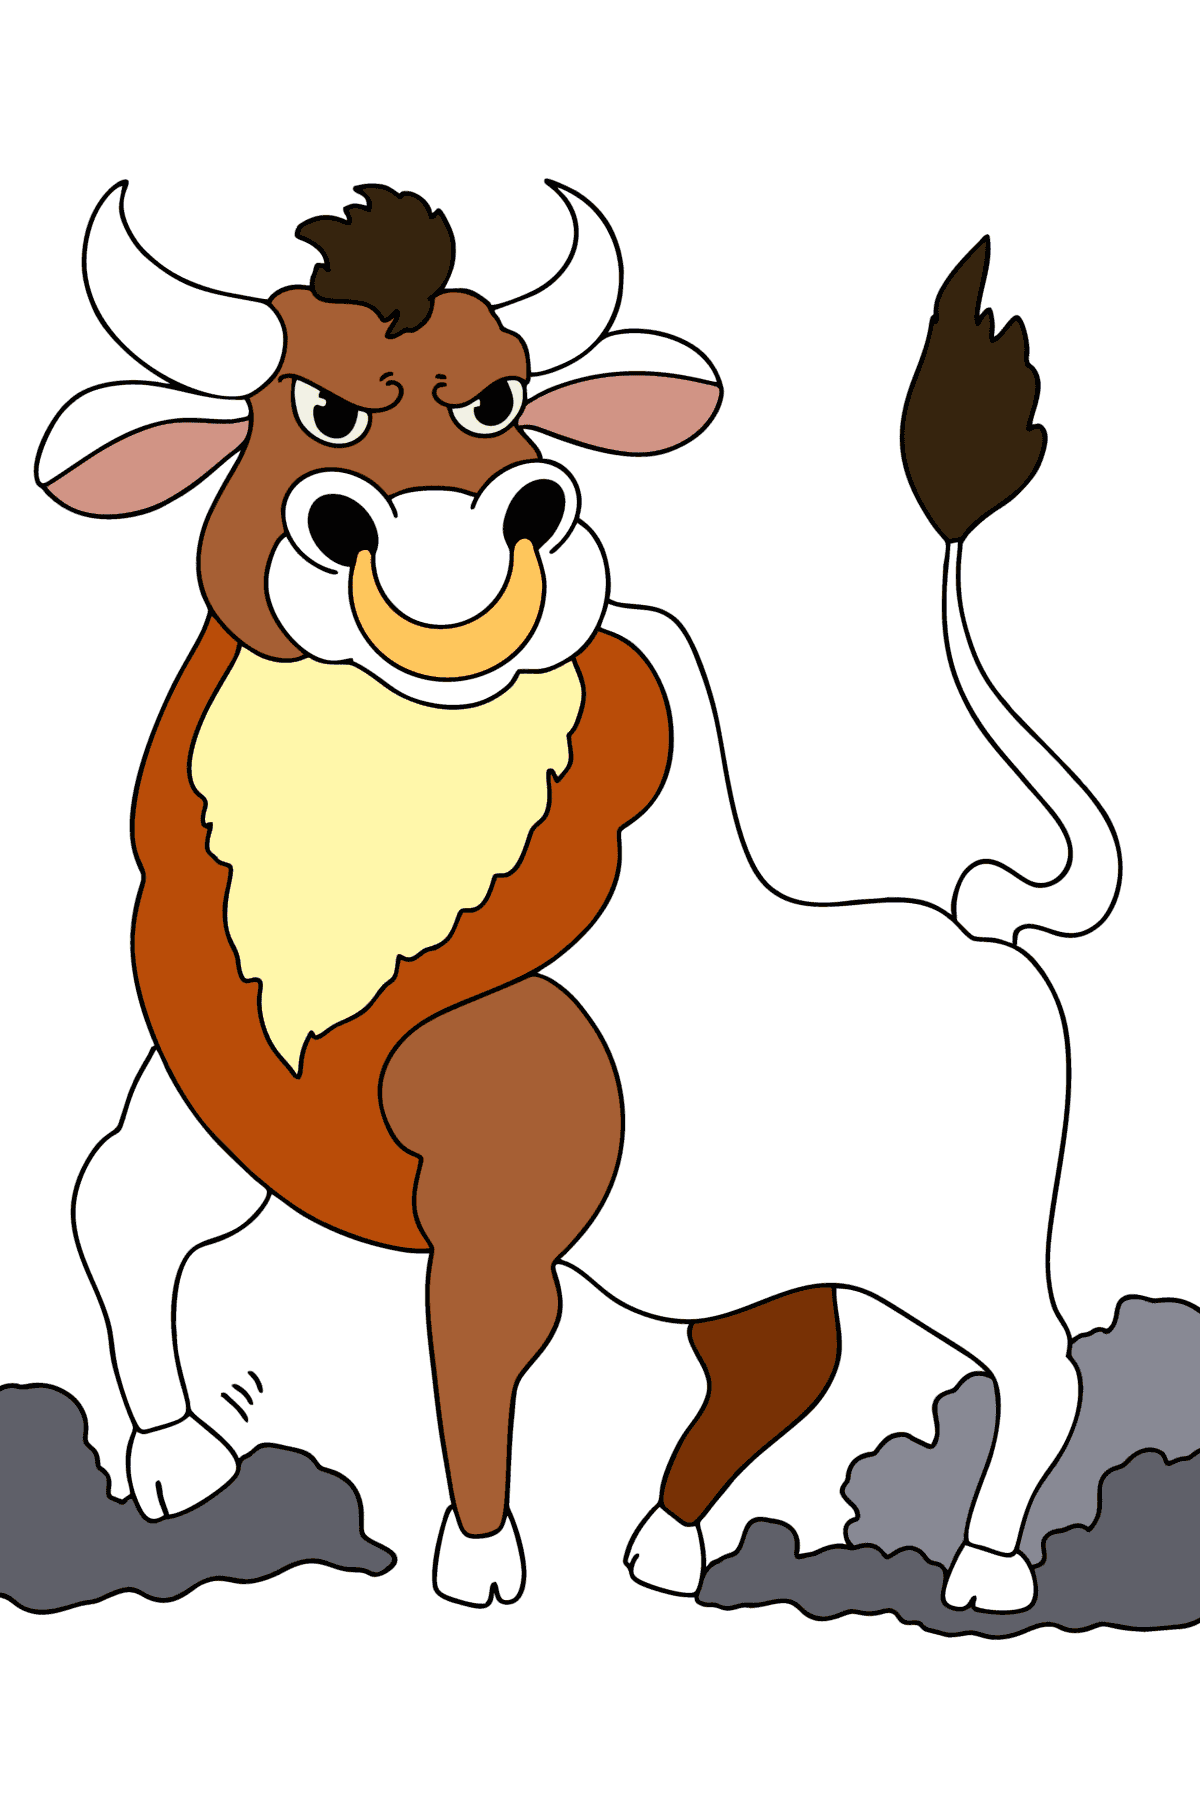 Brave bull Coloring page - Coloring Pages for Kids